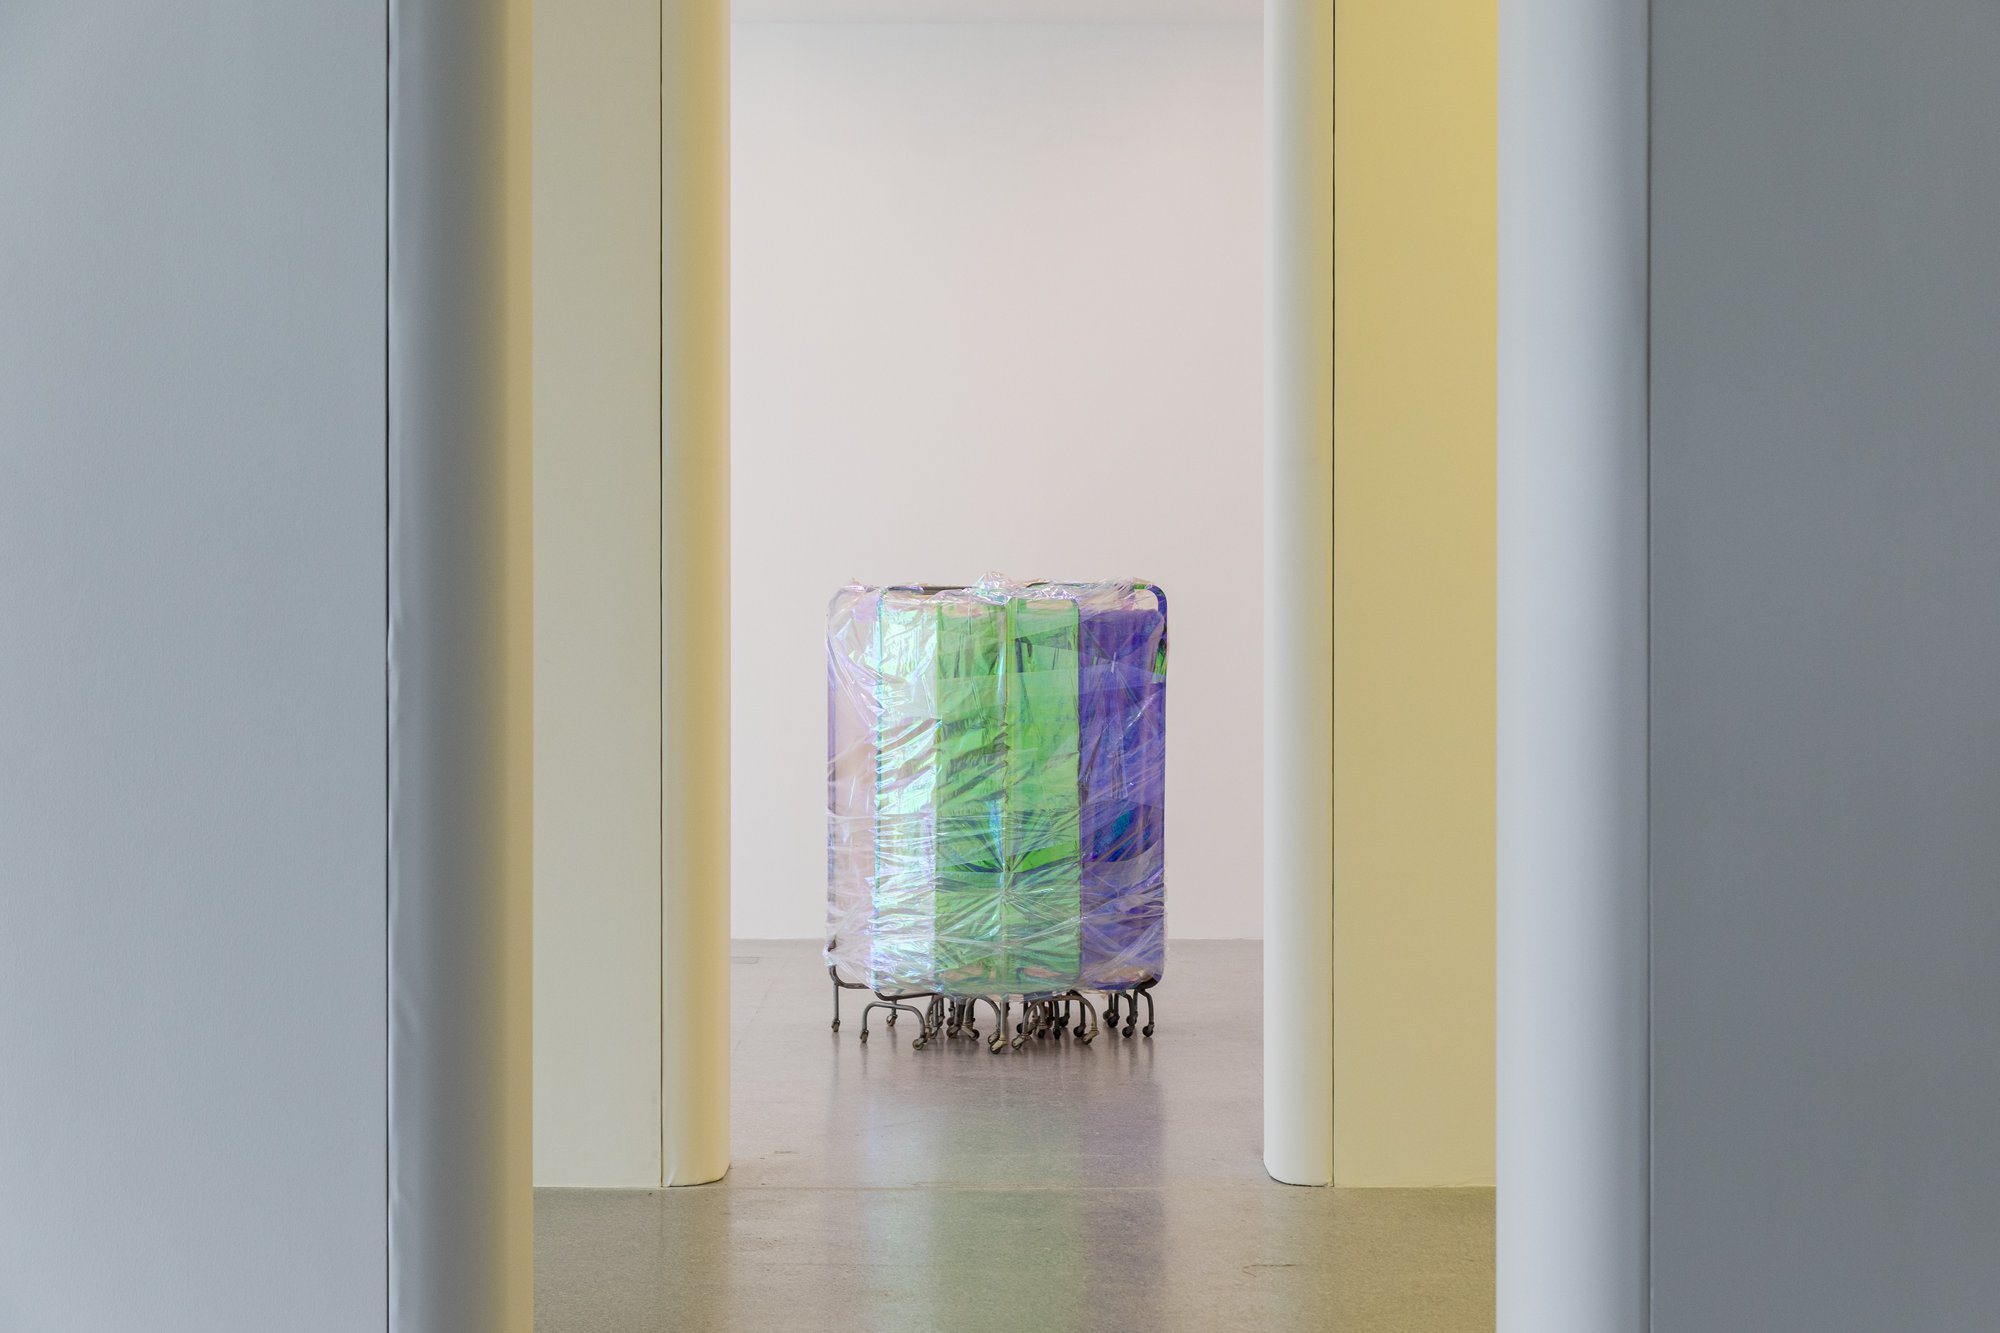 Ian Law, There was a body, I was there, was a body, medical privacy screens with soft toy fur fabric and curtain netting, gift wrapped, 171 x 108 cm (67 1/3 x 42 1/2 in), 2015. Installation view, Kingdom of the Ill: Second chapter of TECHNO HUMANITIES, Museion, Bolzano, 2022